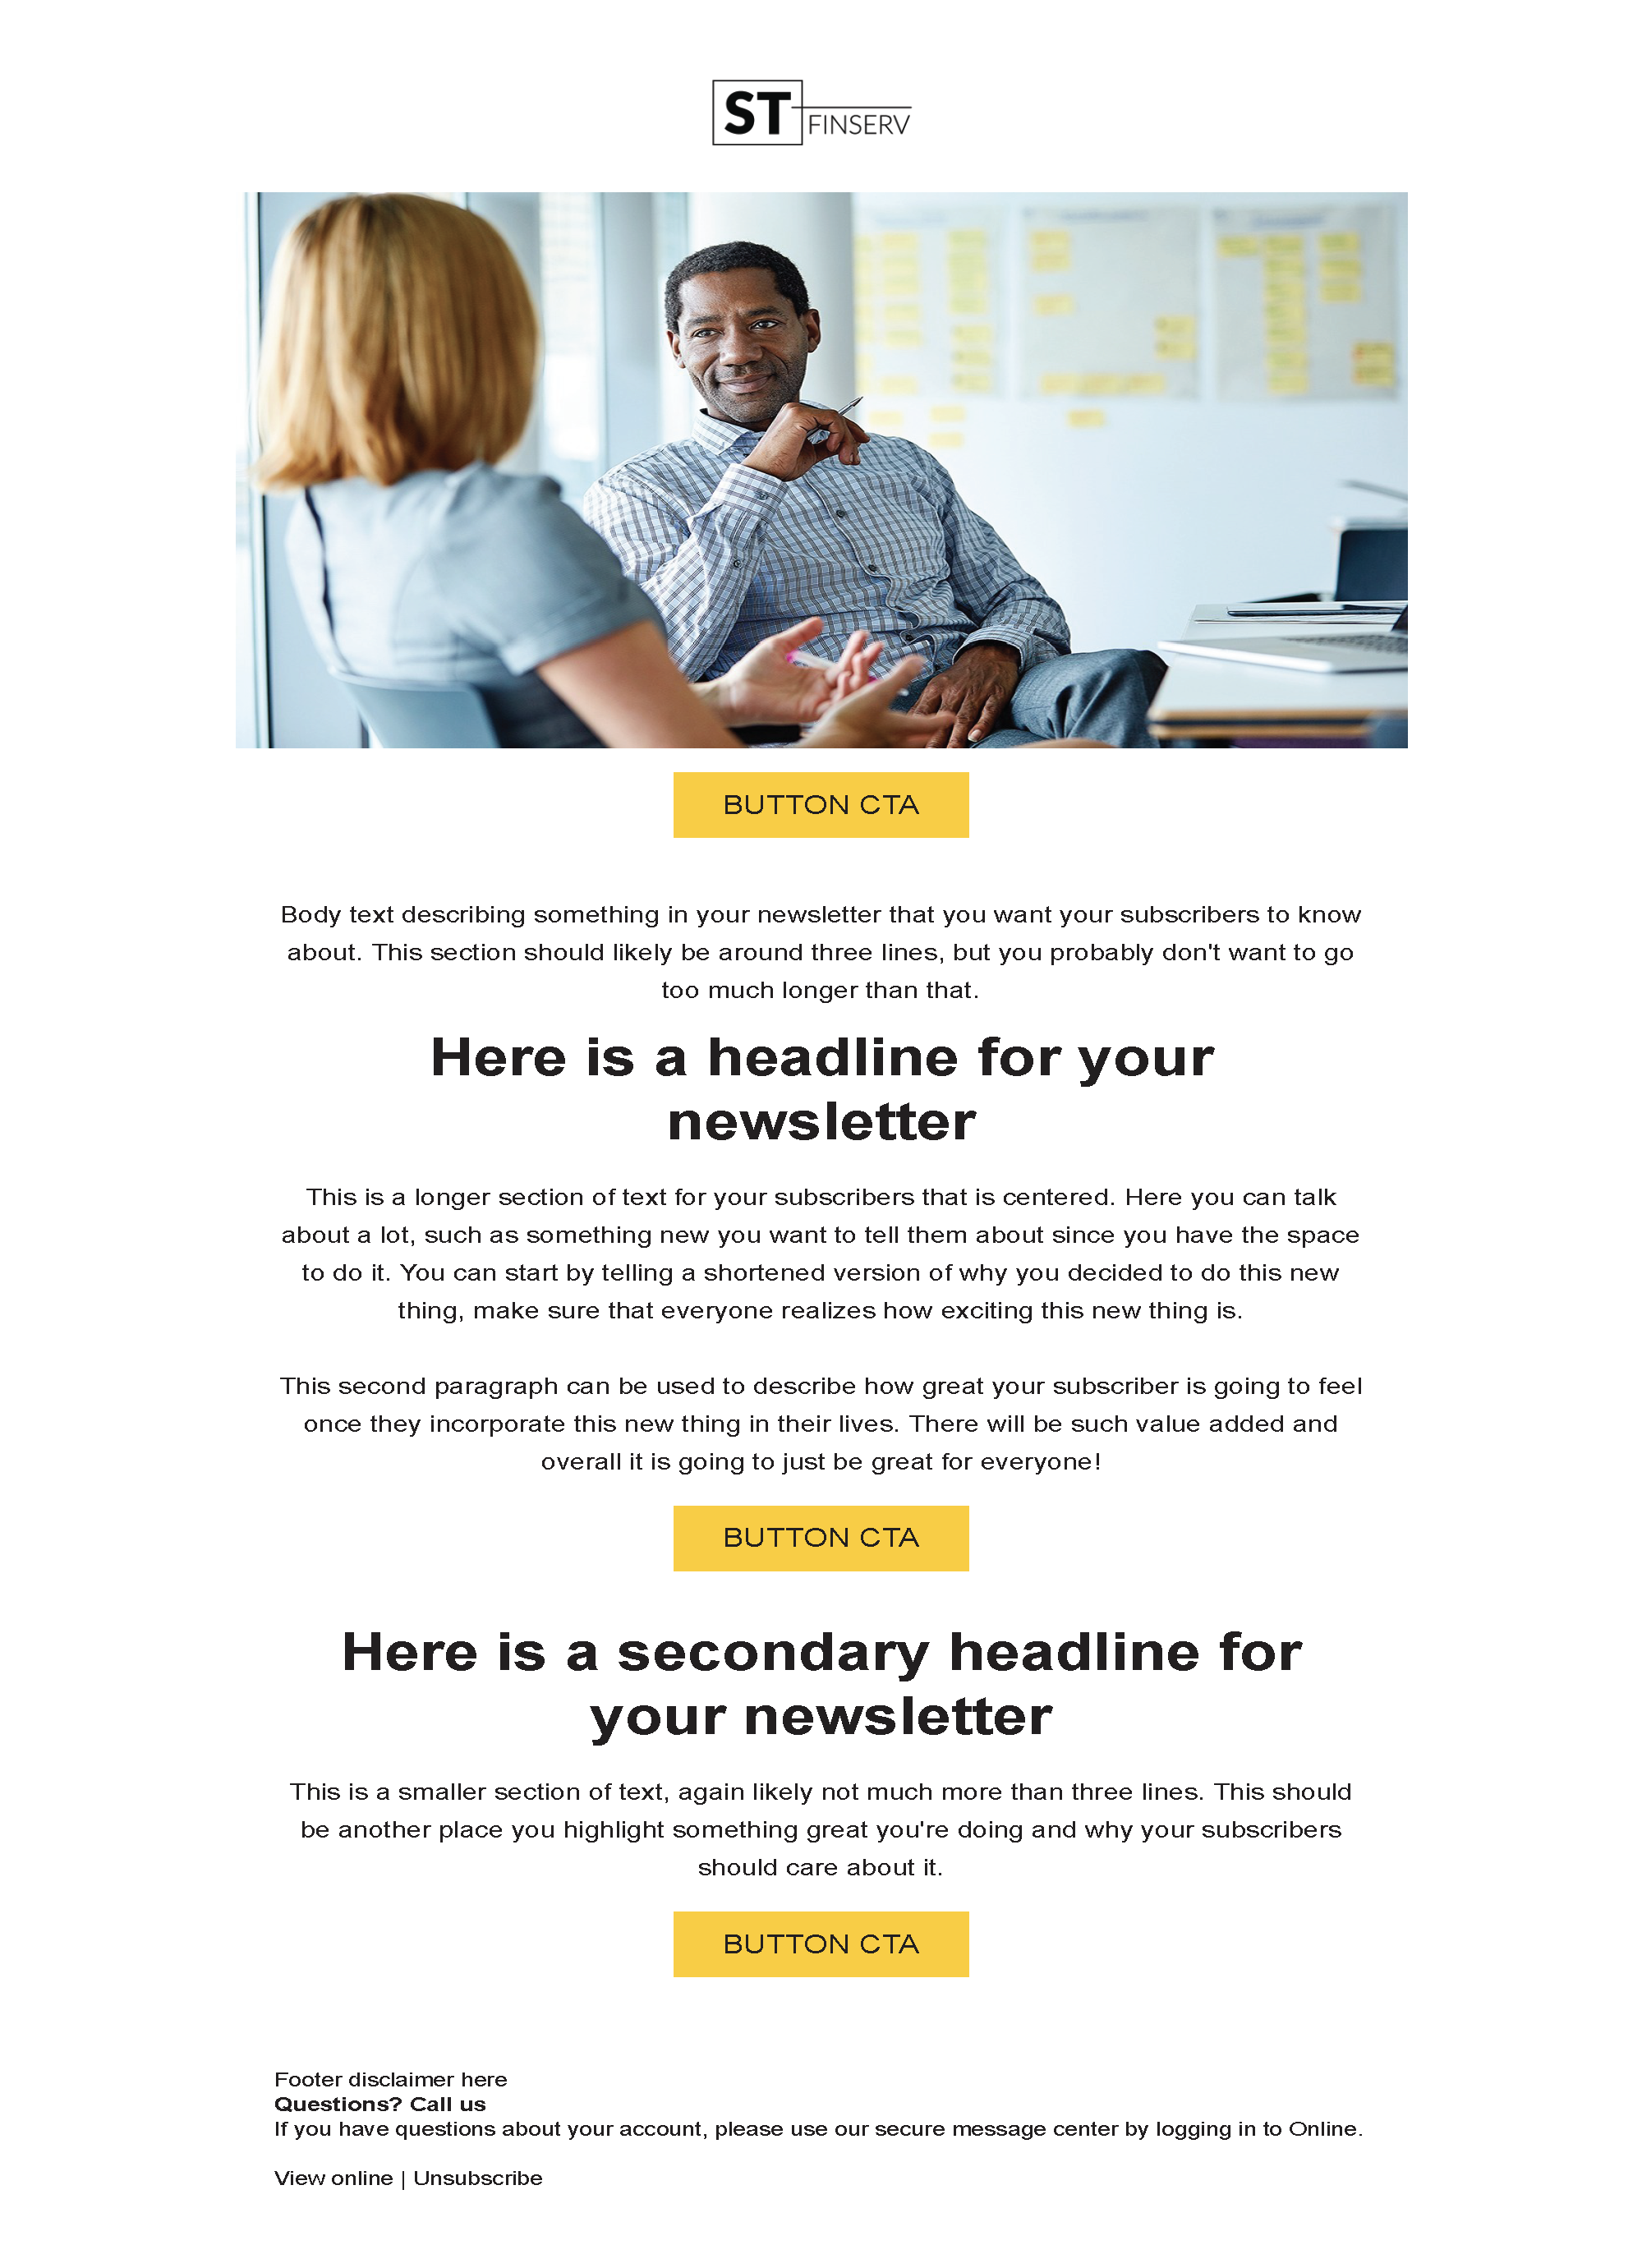 Newsletter email template 2 for highly regulated industries